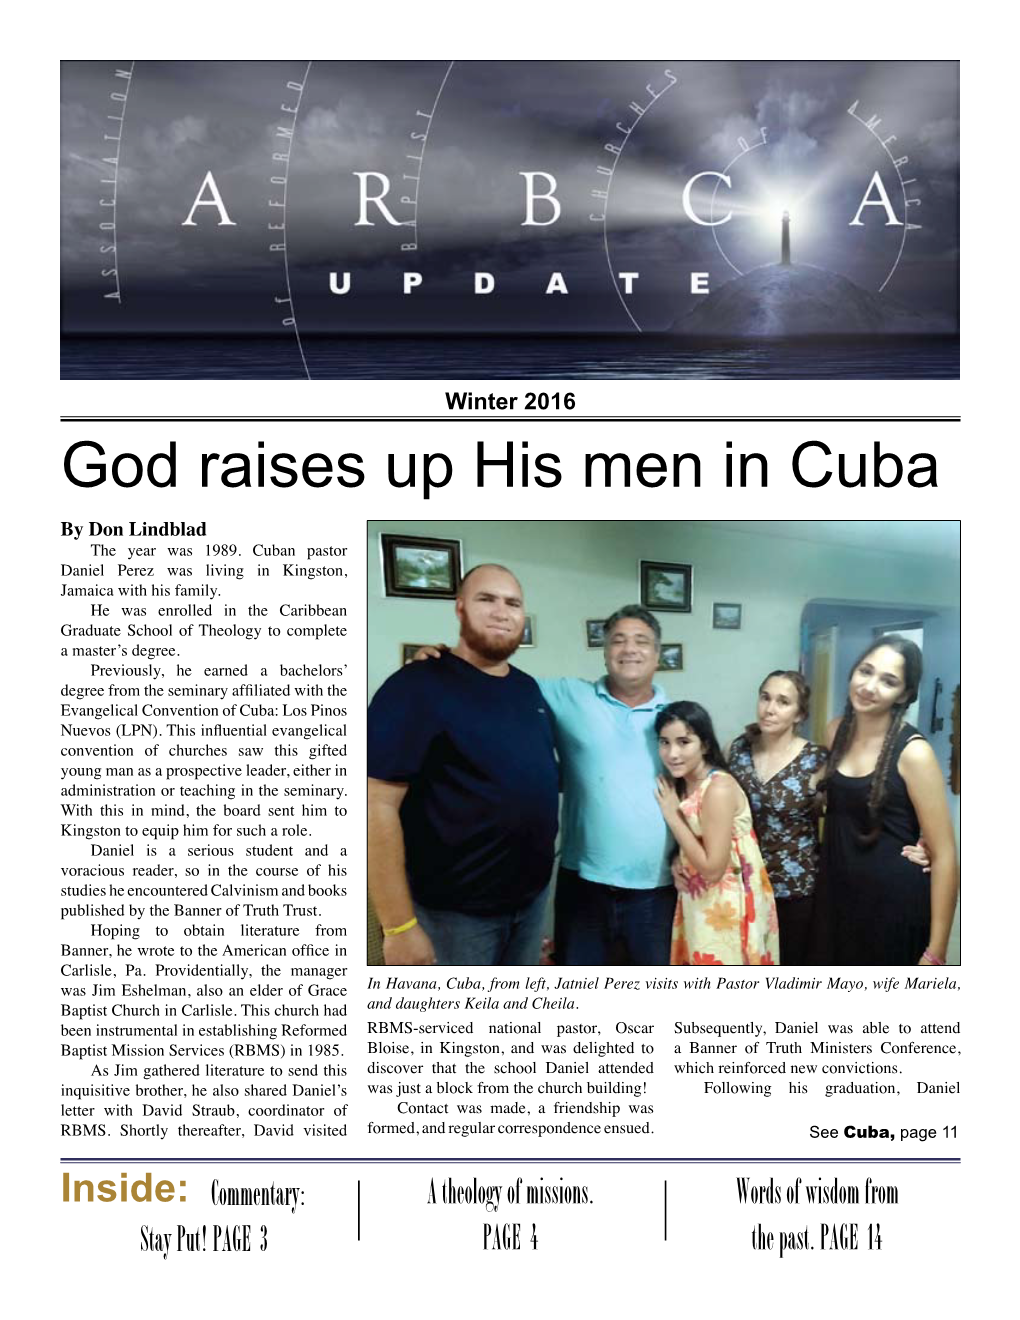 God Raises up His Men in Cuba by Don Lindblad the Year Was 1989